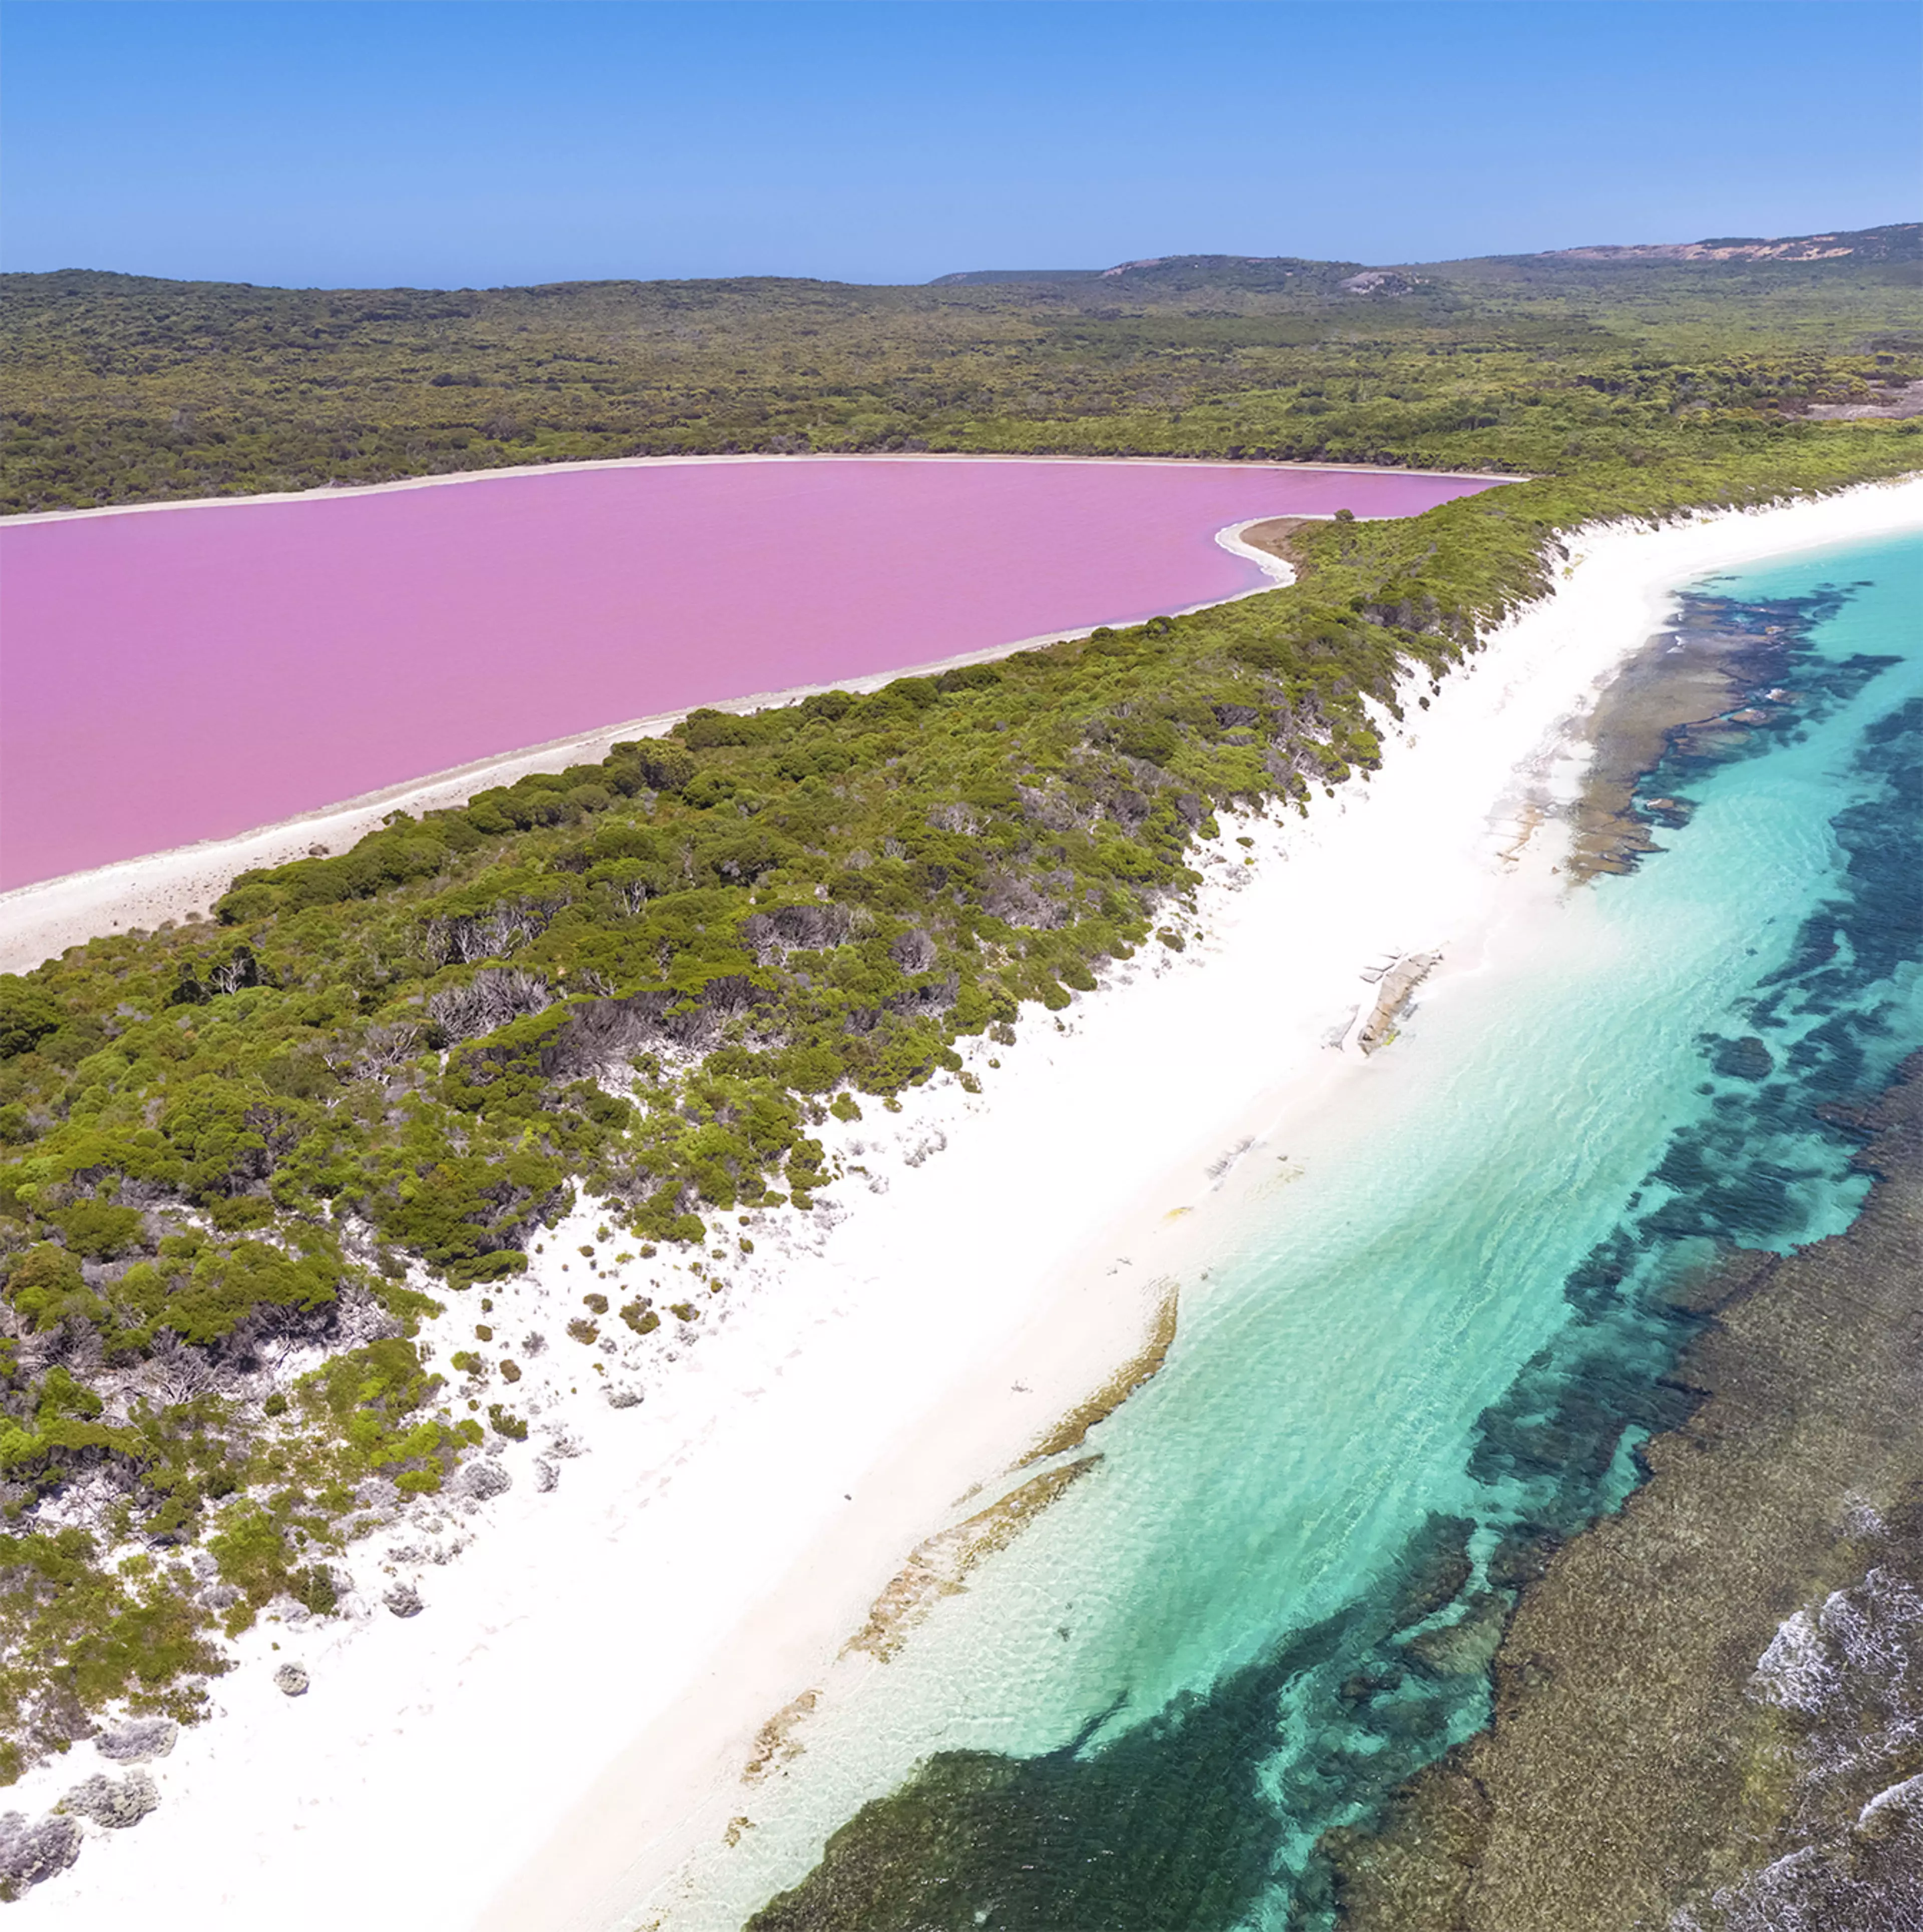 Can we visit Lake Hillier now please? (